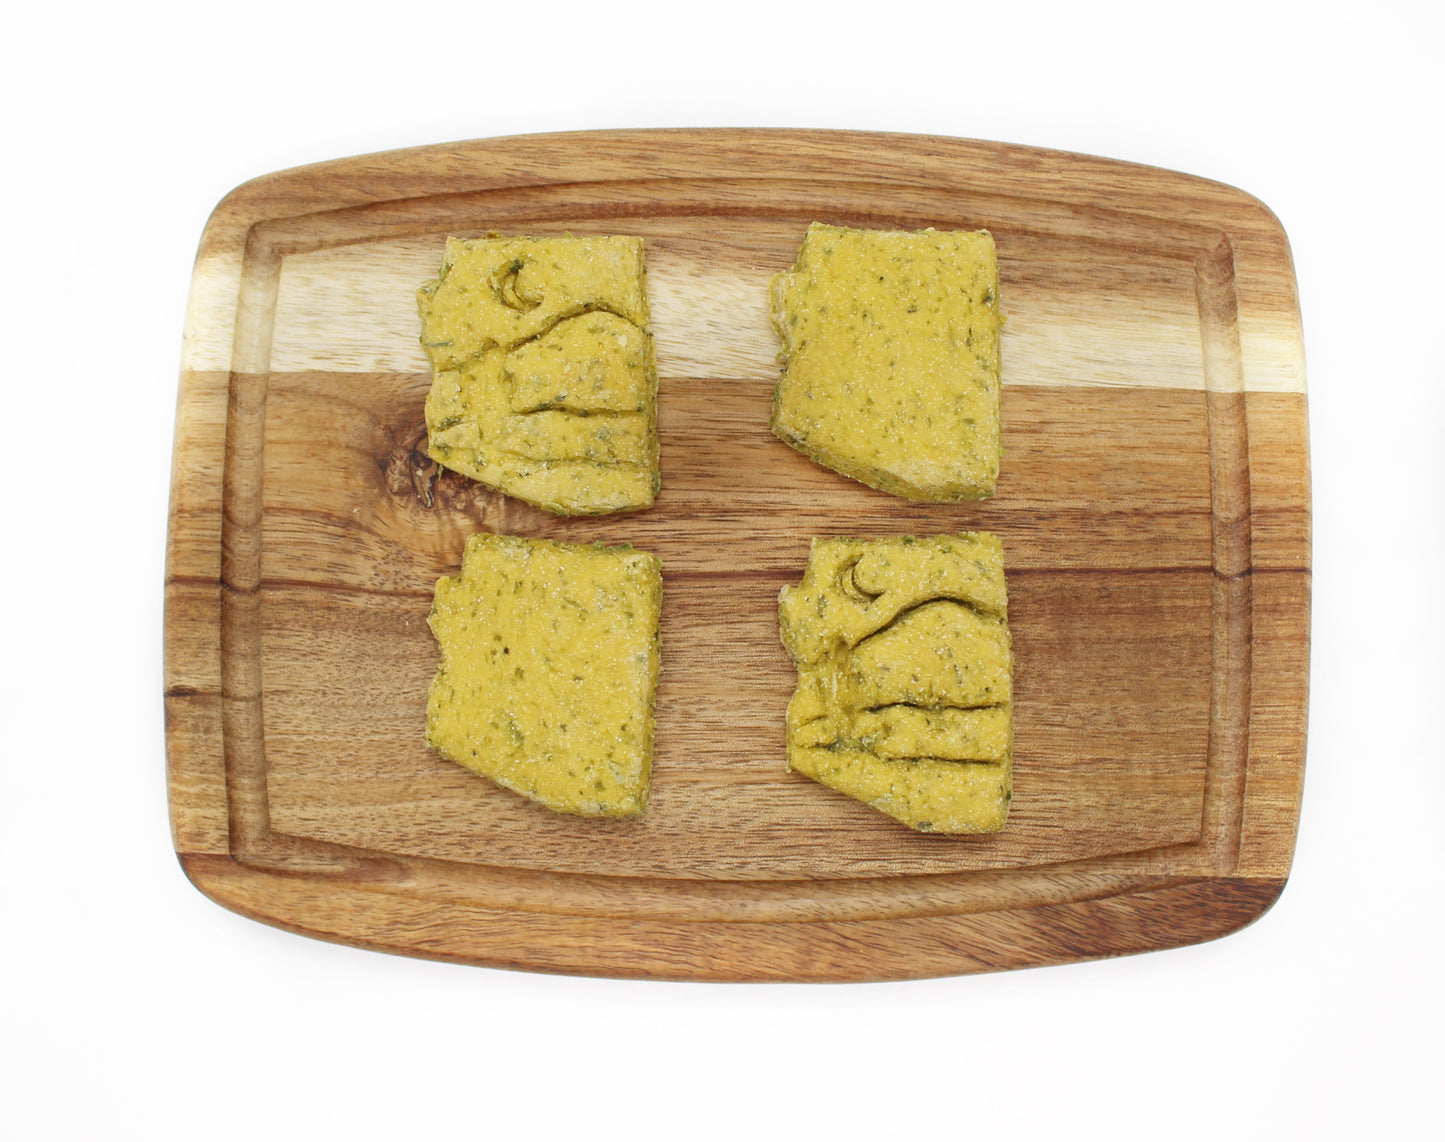 Delicious Broccoli and Peas based dog treat. Four green treats  sit on a cutting board.  All treats are cut in the shape of the State of Arizona, two have a desert theme stamped into them.